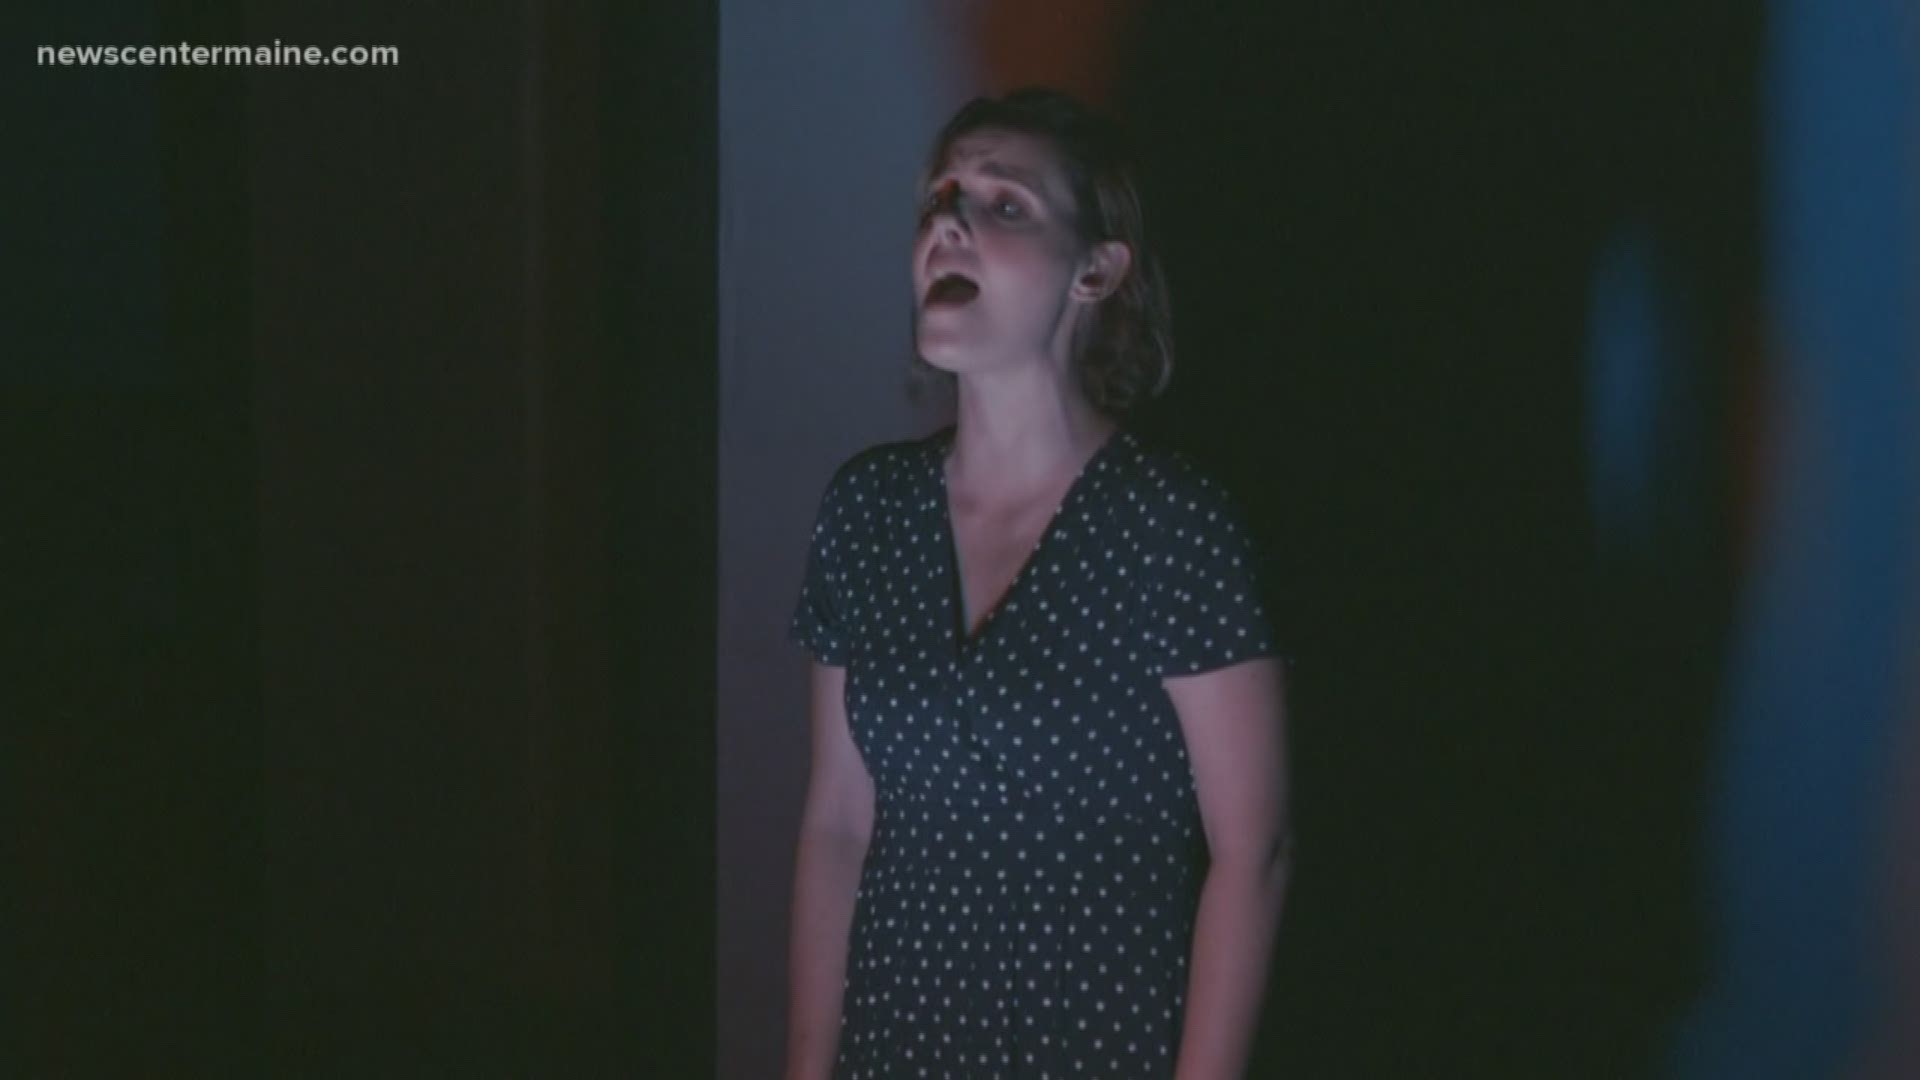 Not many people find infertility a laughing matter, but this production for the stage, Misconceptions, aims to add light in the darkest bedroom.